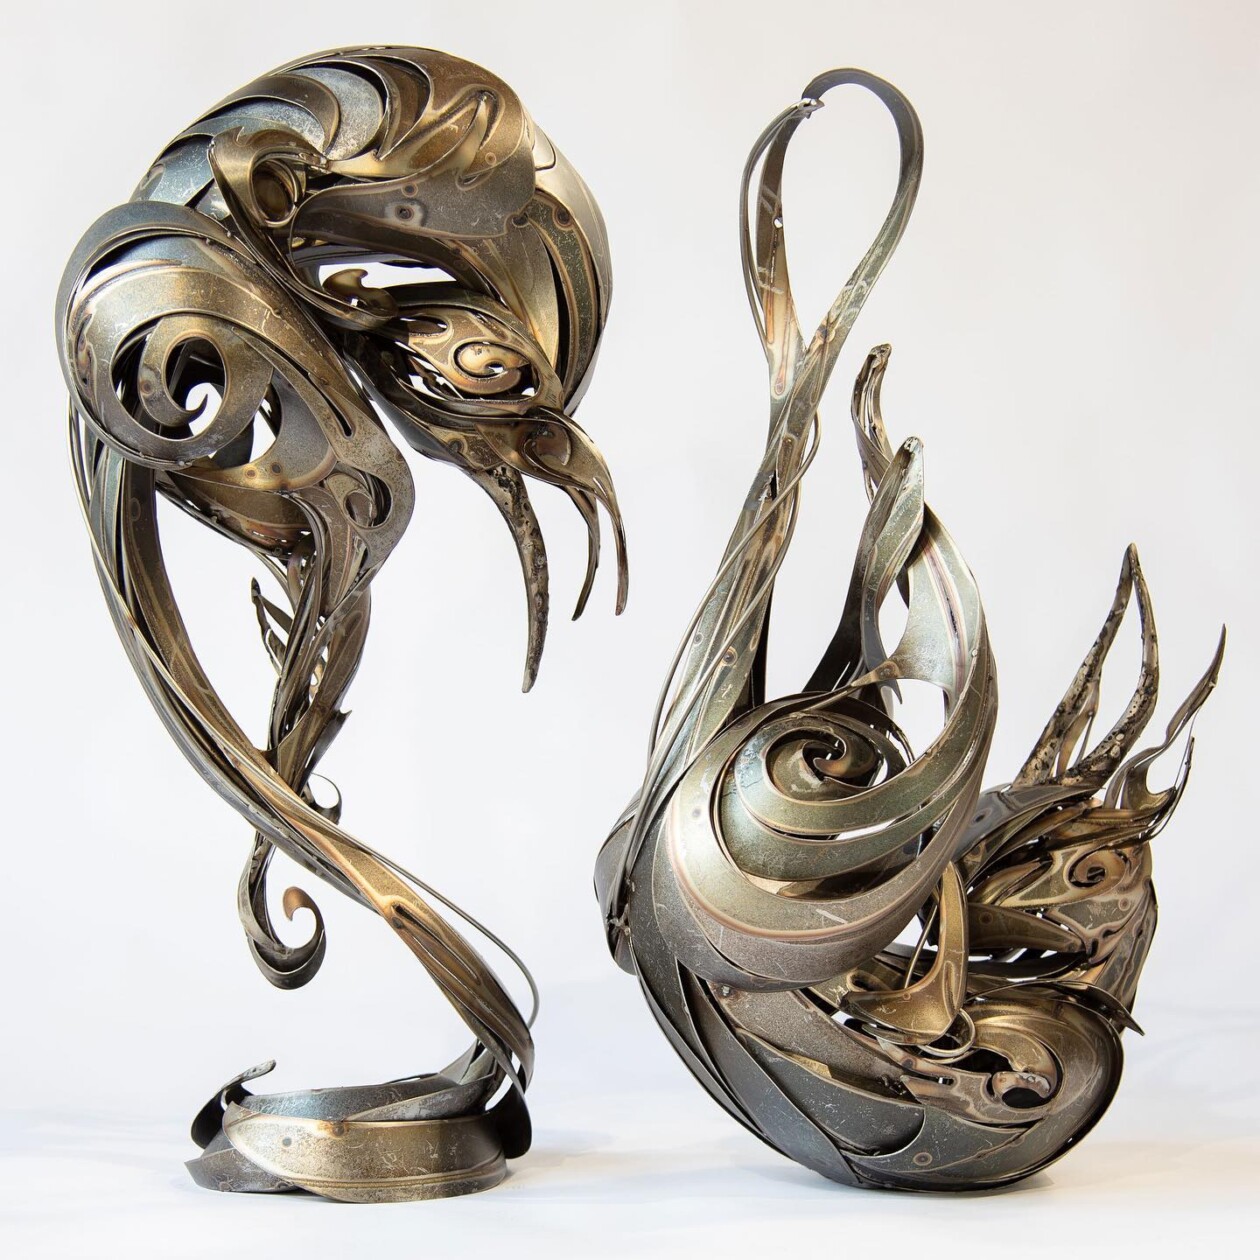 Magnificent Metallic Animal Sculptures Made With Sweeping Lines By Georgie Seccull (18)